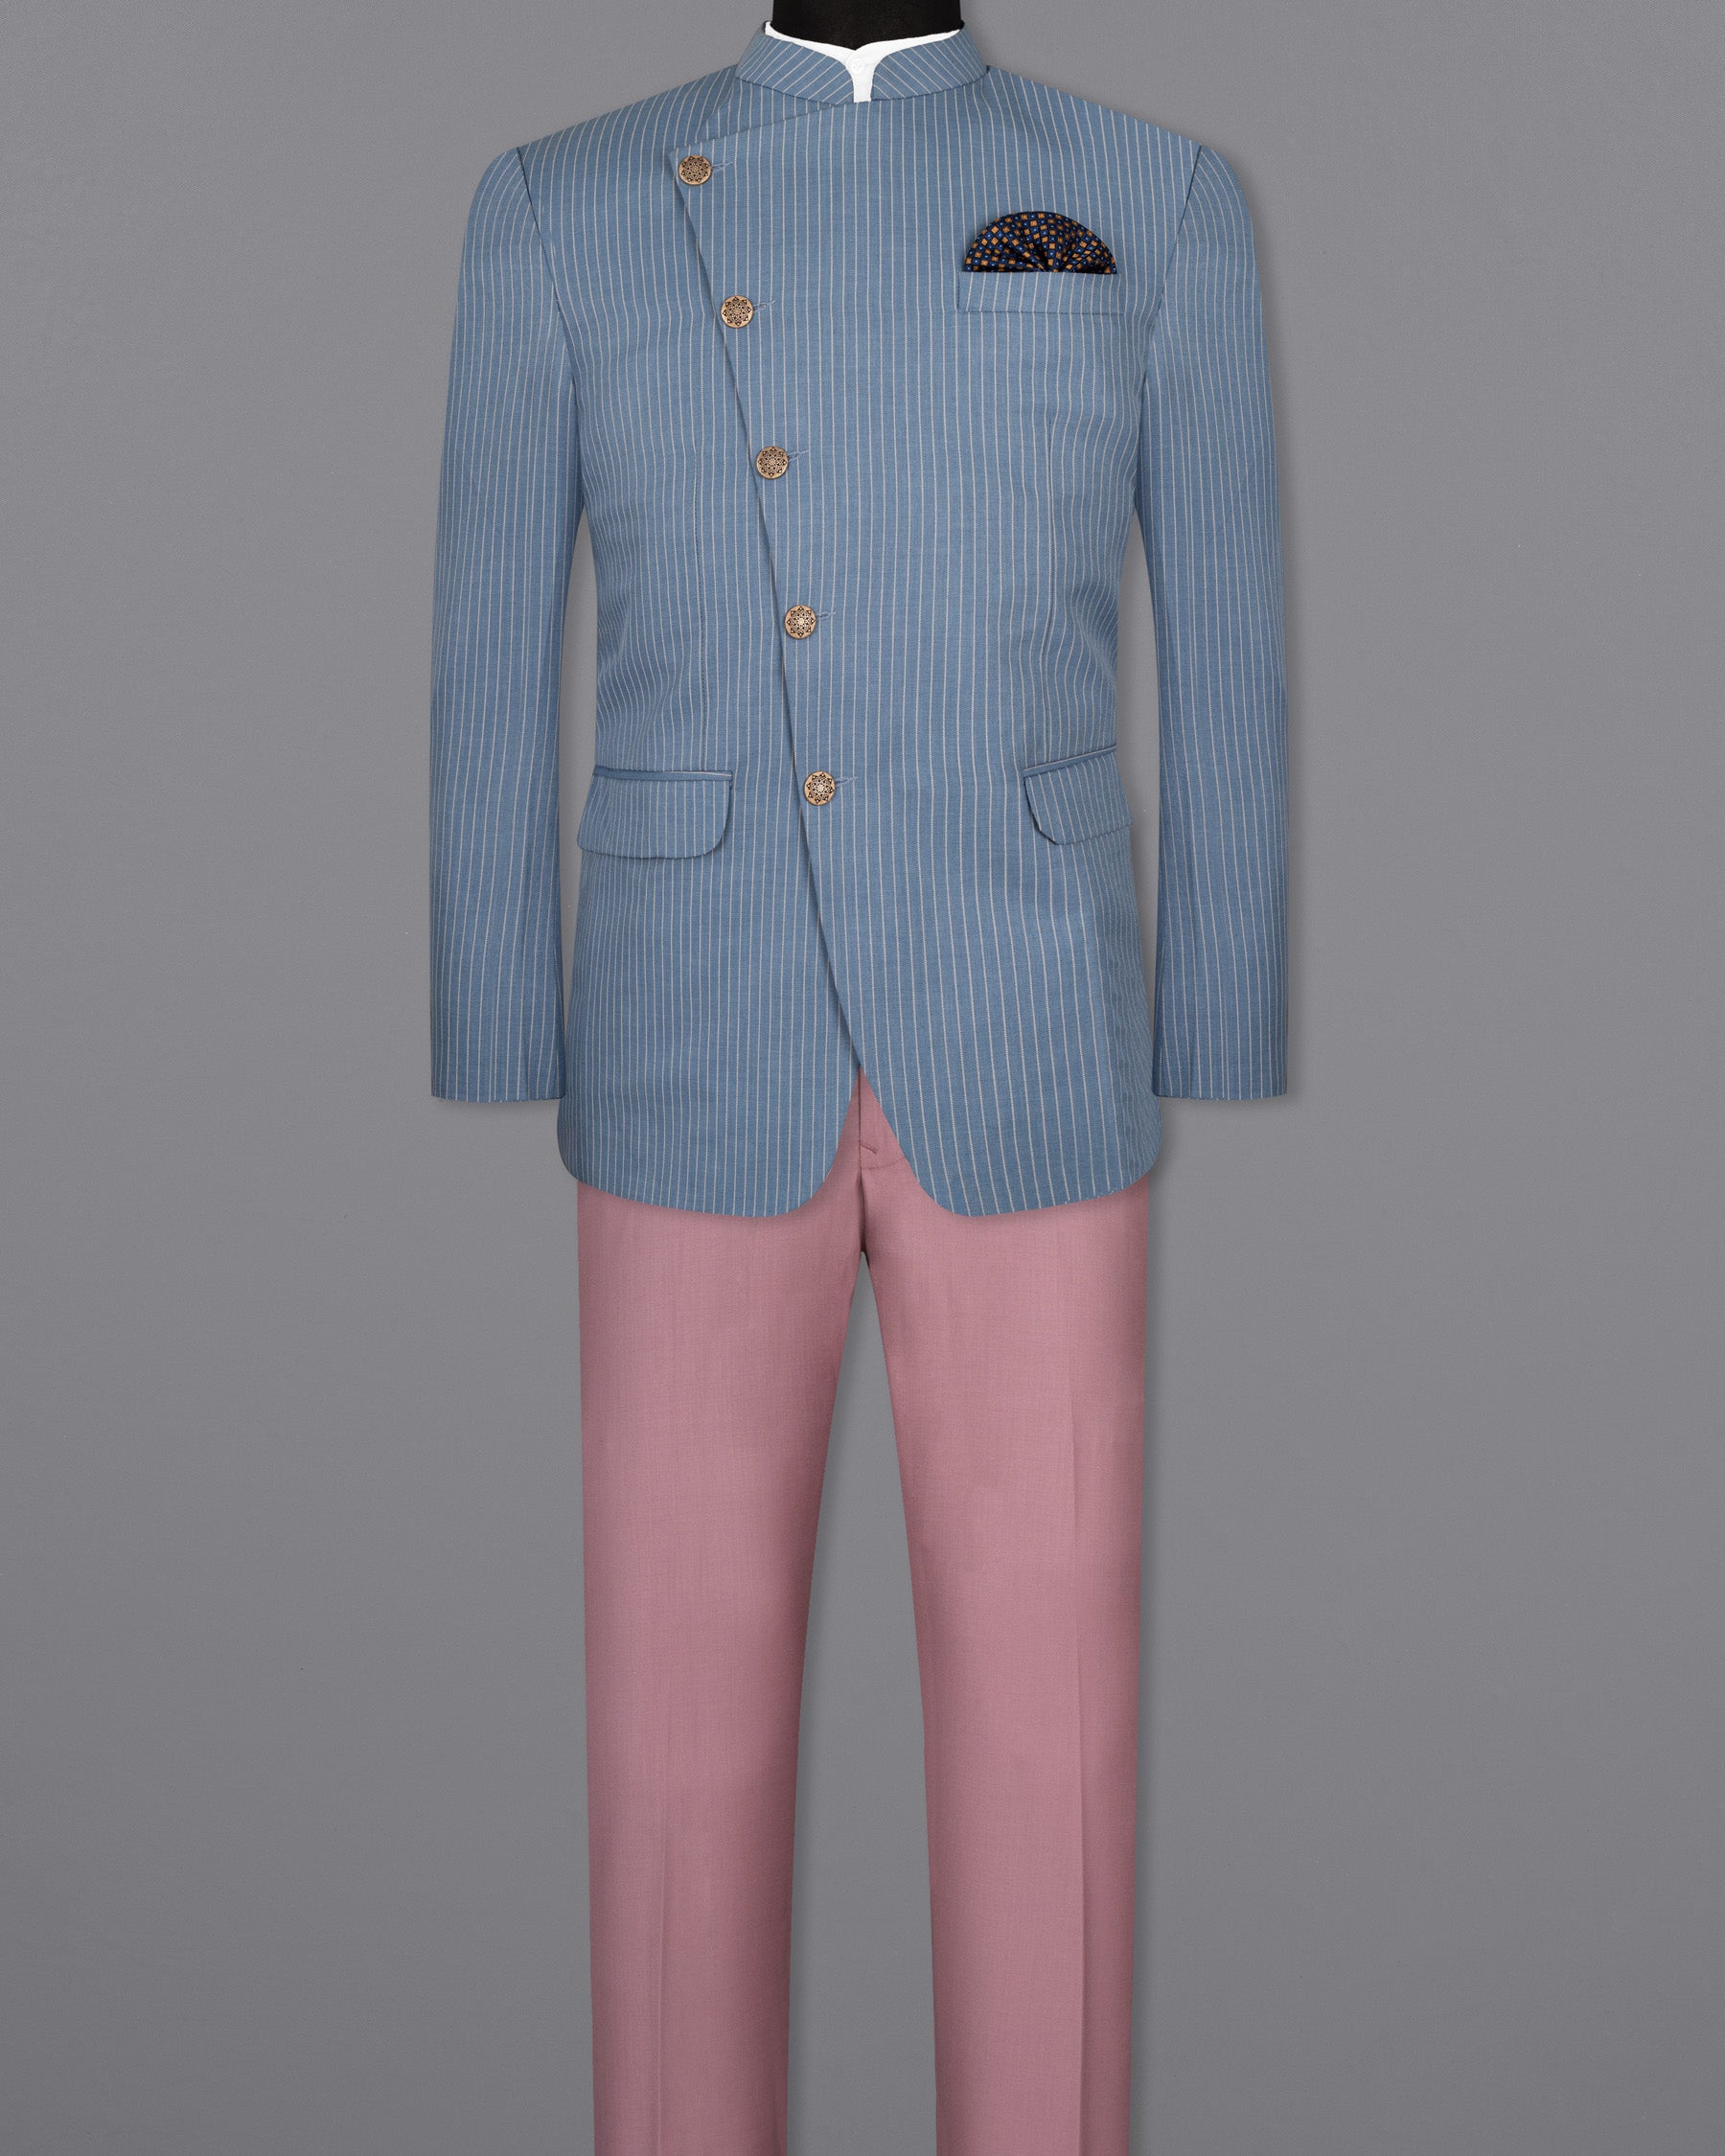 Ship Cove STue Striped Cross Buttoned Wool Rich Bandhgala Suit ST1504-CBG-36, ST1504-CBG-38, ST1504-CBG-40, ST1504-CBG-42, ST1504-CBG-44, ST1504-CBG-46, ST1504-CBG-48, ST1504-CBG-50, ST1504-CBG-52, ST1504-CBG-54, ST1504-CBG-56, ST1504-CBG-58, ST1504-CBG-60